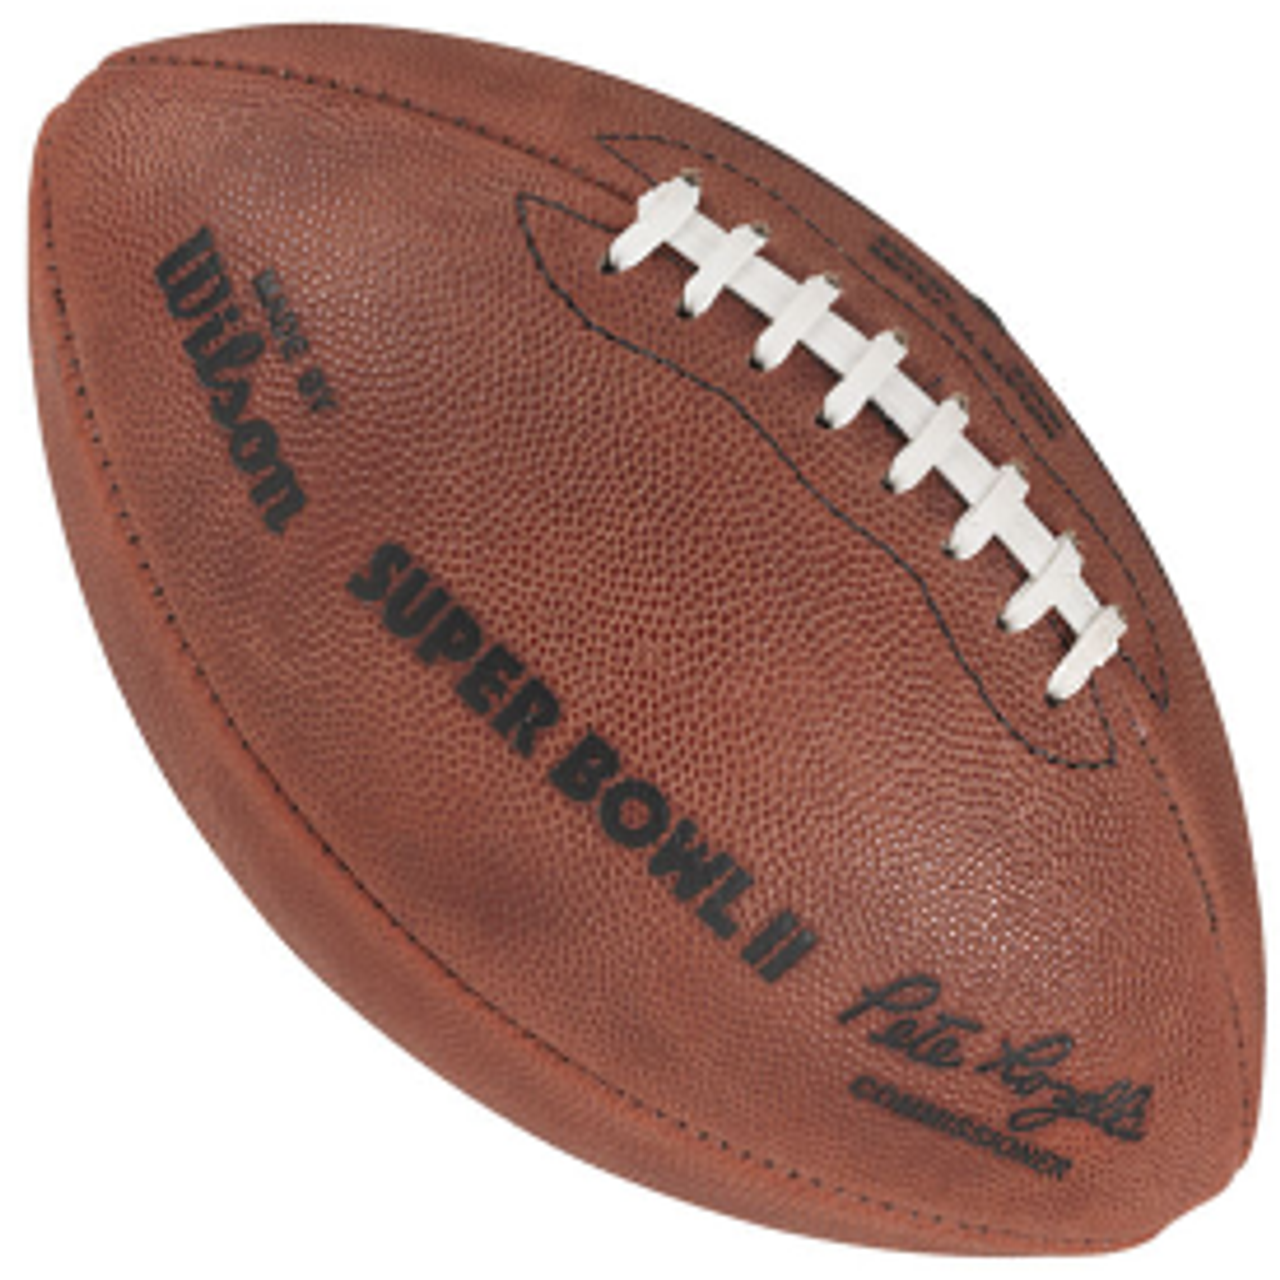 Super Bowl XXXI (Thirty-One 31) Green Bay Packers vs. New England Patriots  Official Leather Authentic Game Football by Wilson